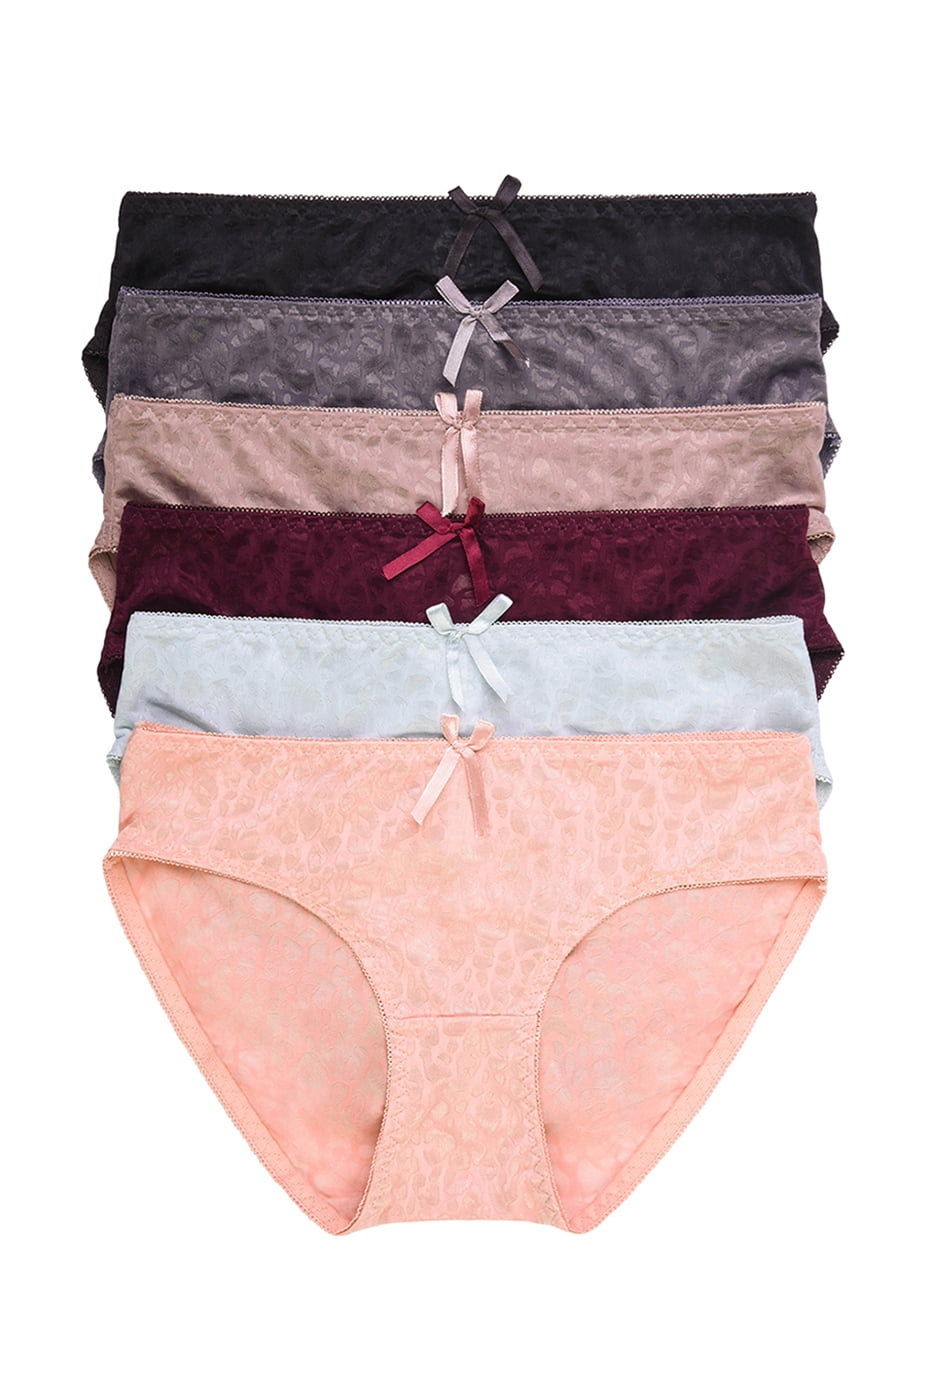   Essentials Women's Modal with Lace Bikini Panty, Pack of  4, Blush/Camel/Taupe/White, Medium : Clothing, Shoes & Jewelry